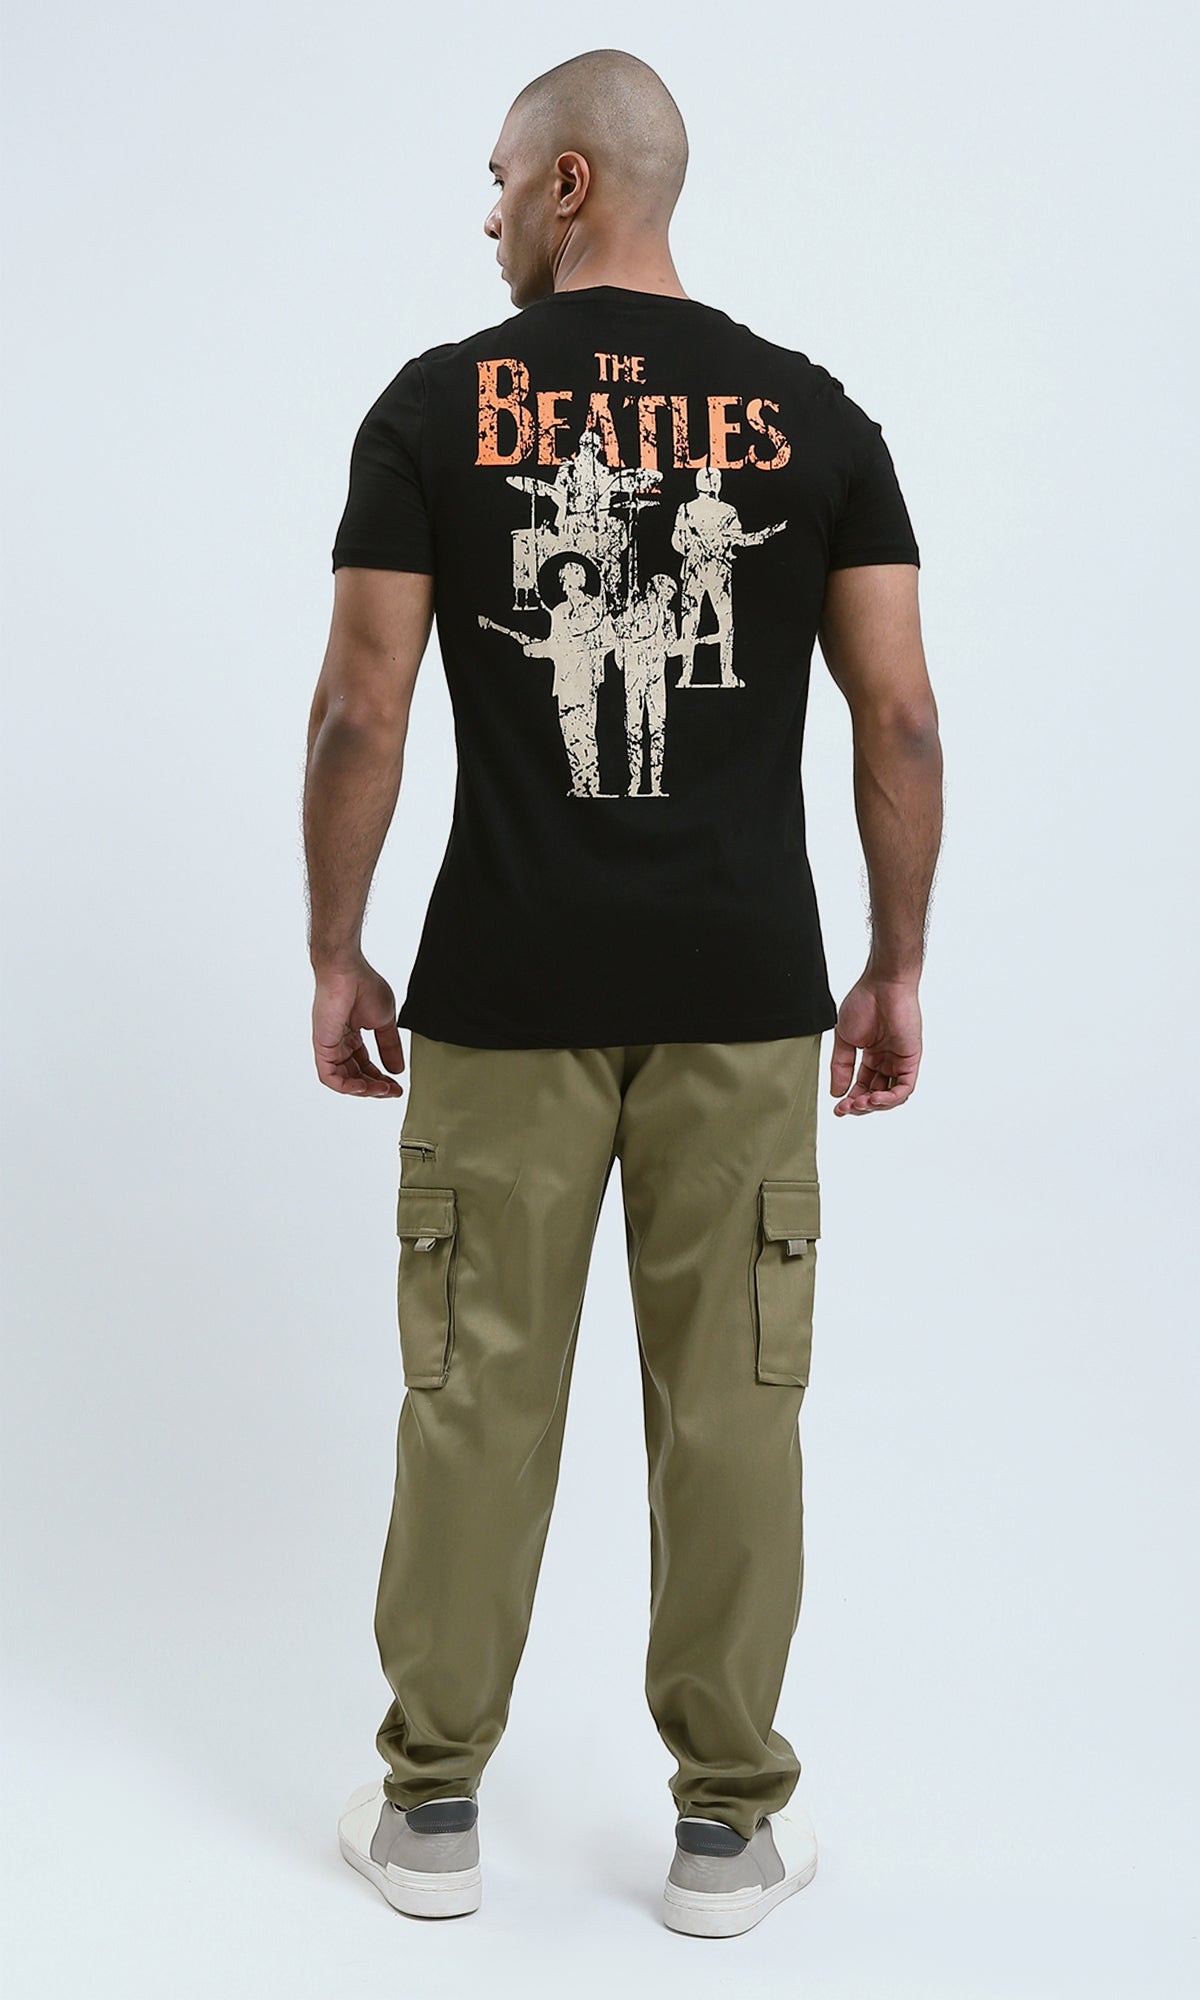 O182448 Black Tee With Front & Back Print "The Beatles"